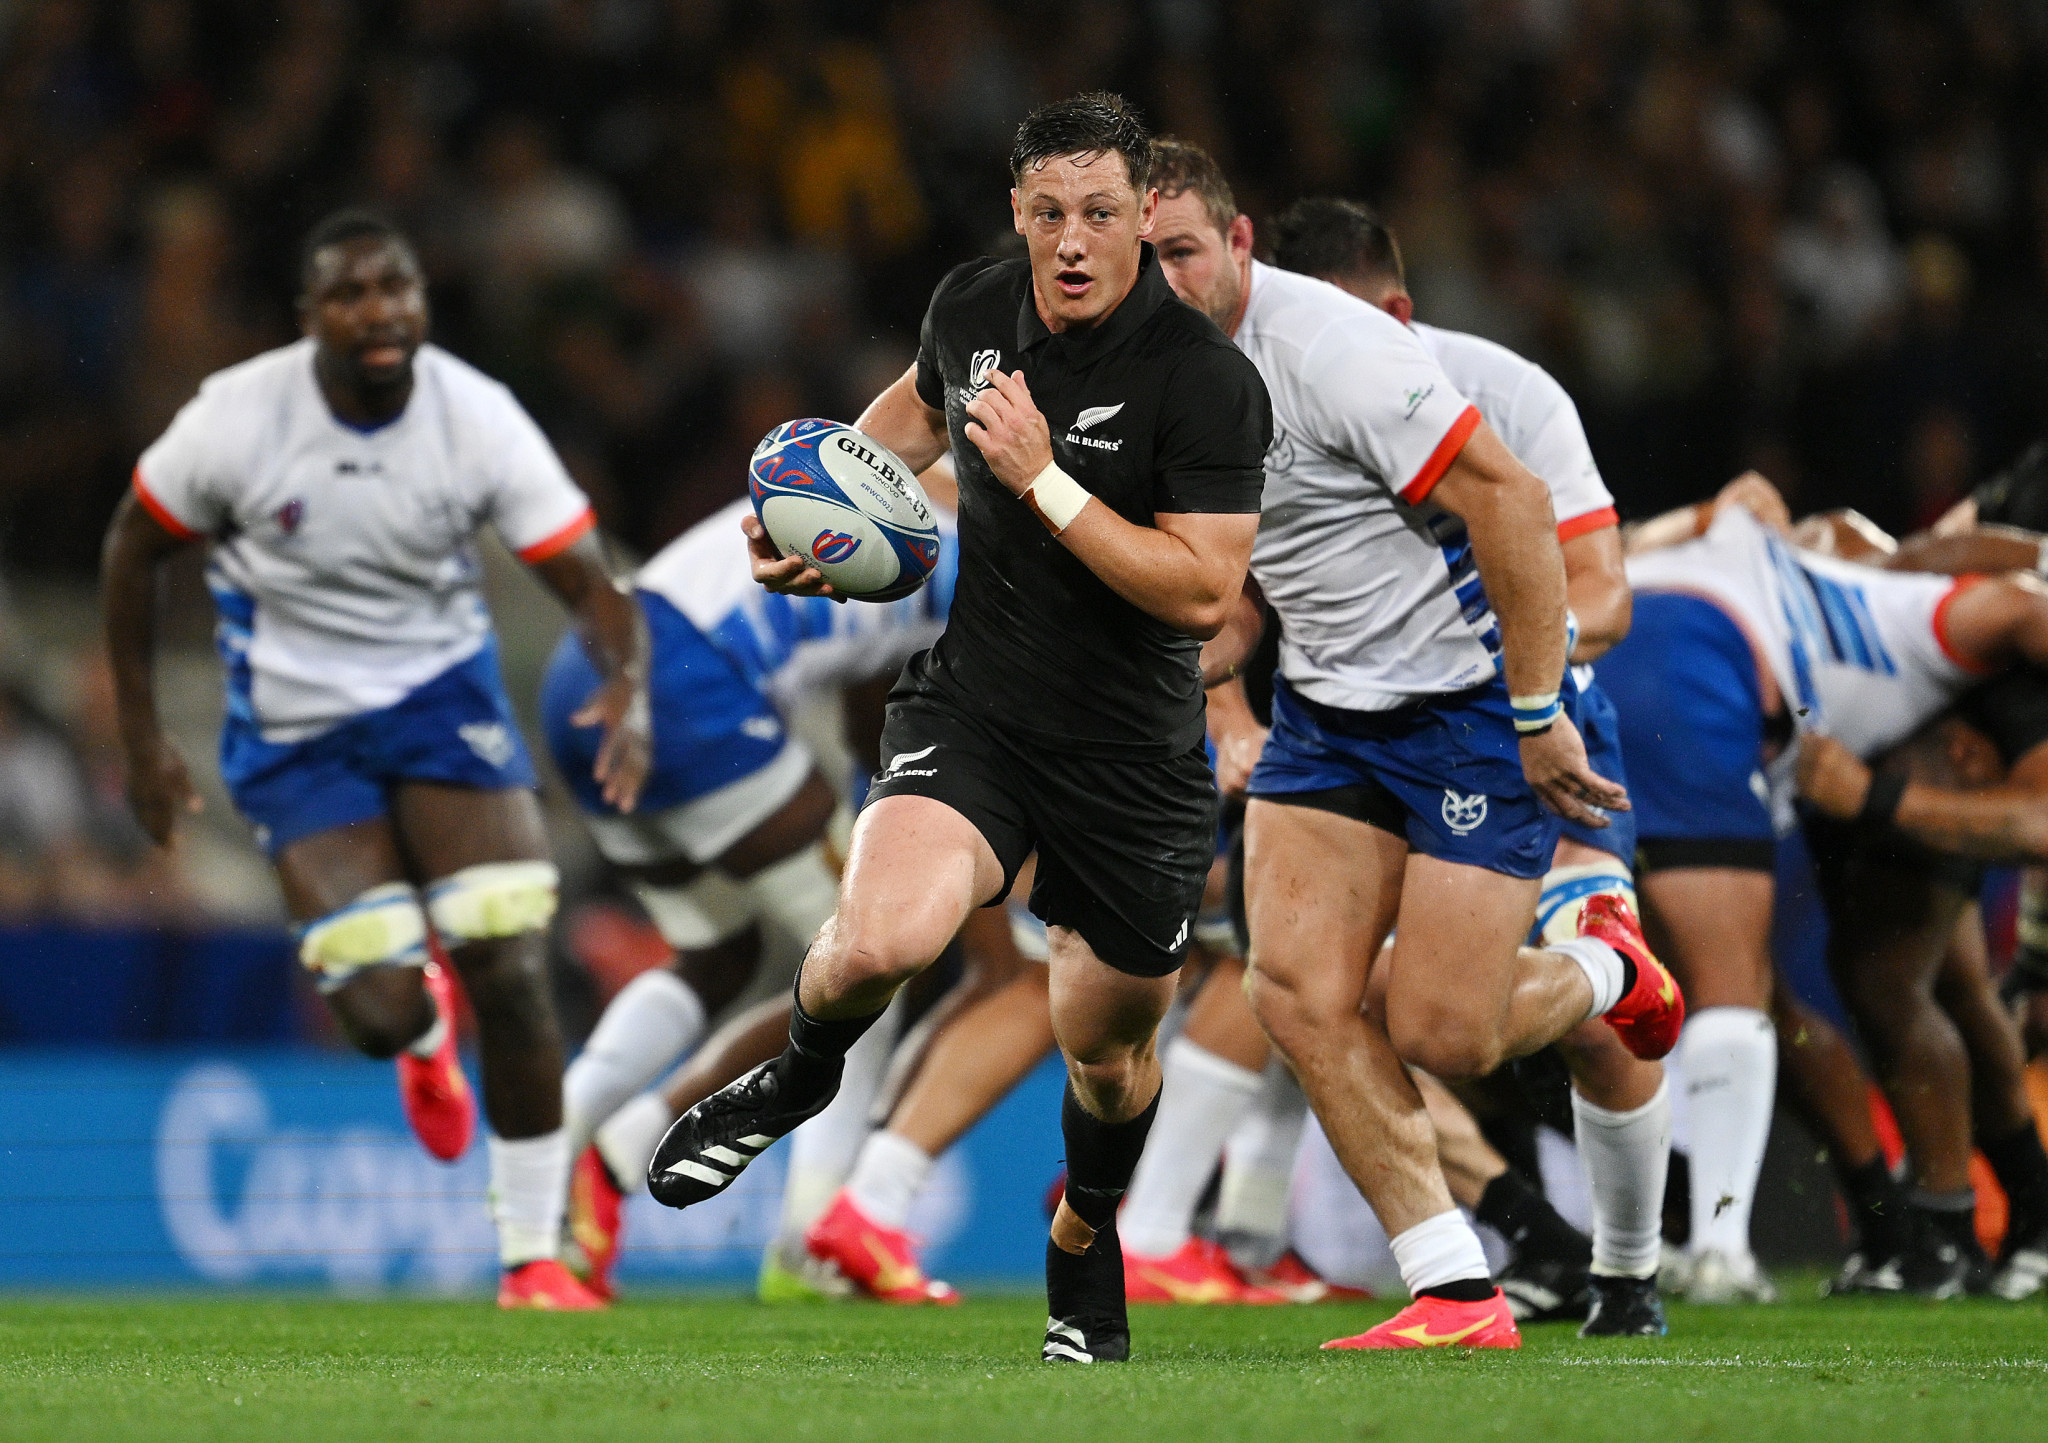 Cam Roigard, centre, scored first for New Zealand as they demolished Namibia ©Getty Images